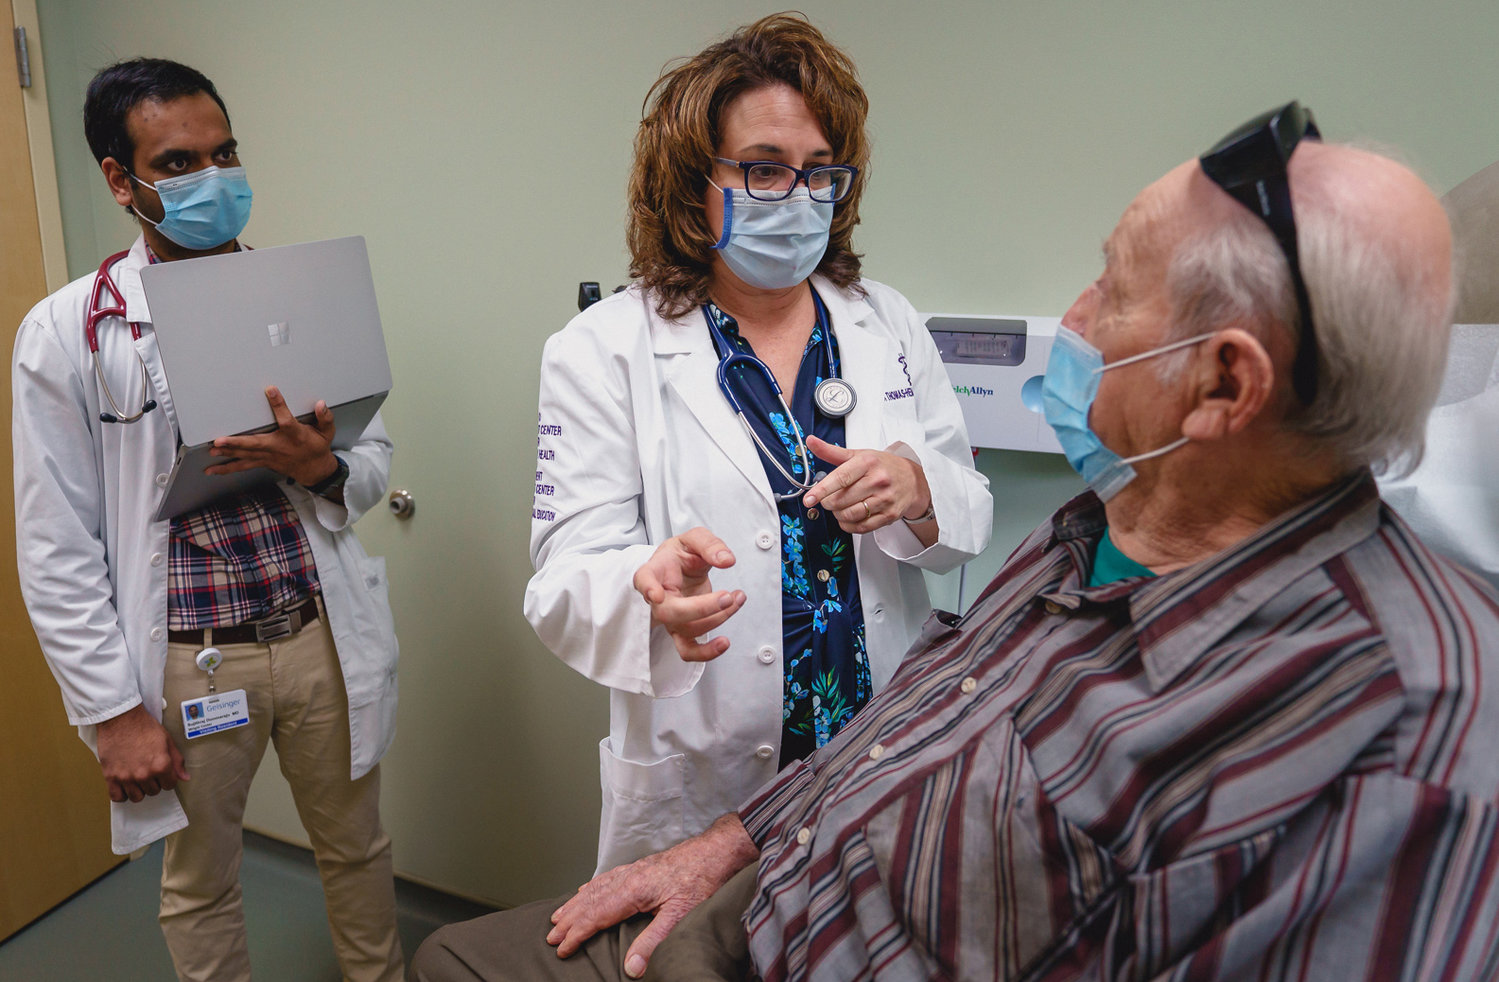 Dr. Linda Thomas-Hemak, president and CEO of the Wright Centers for Community Health and Graduate Medical Education, center, treats a patient at the Mid Valley Practice. A resident physician is participating in the primary care visit. ..